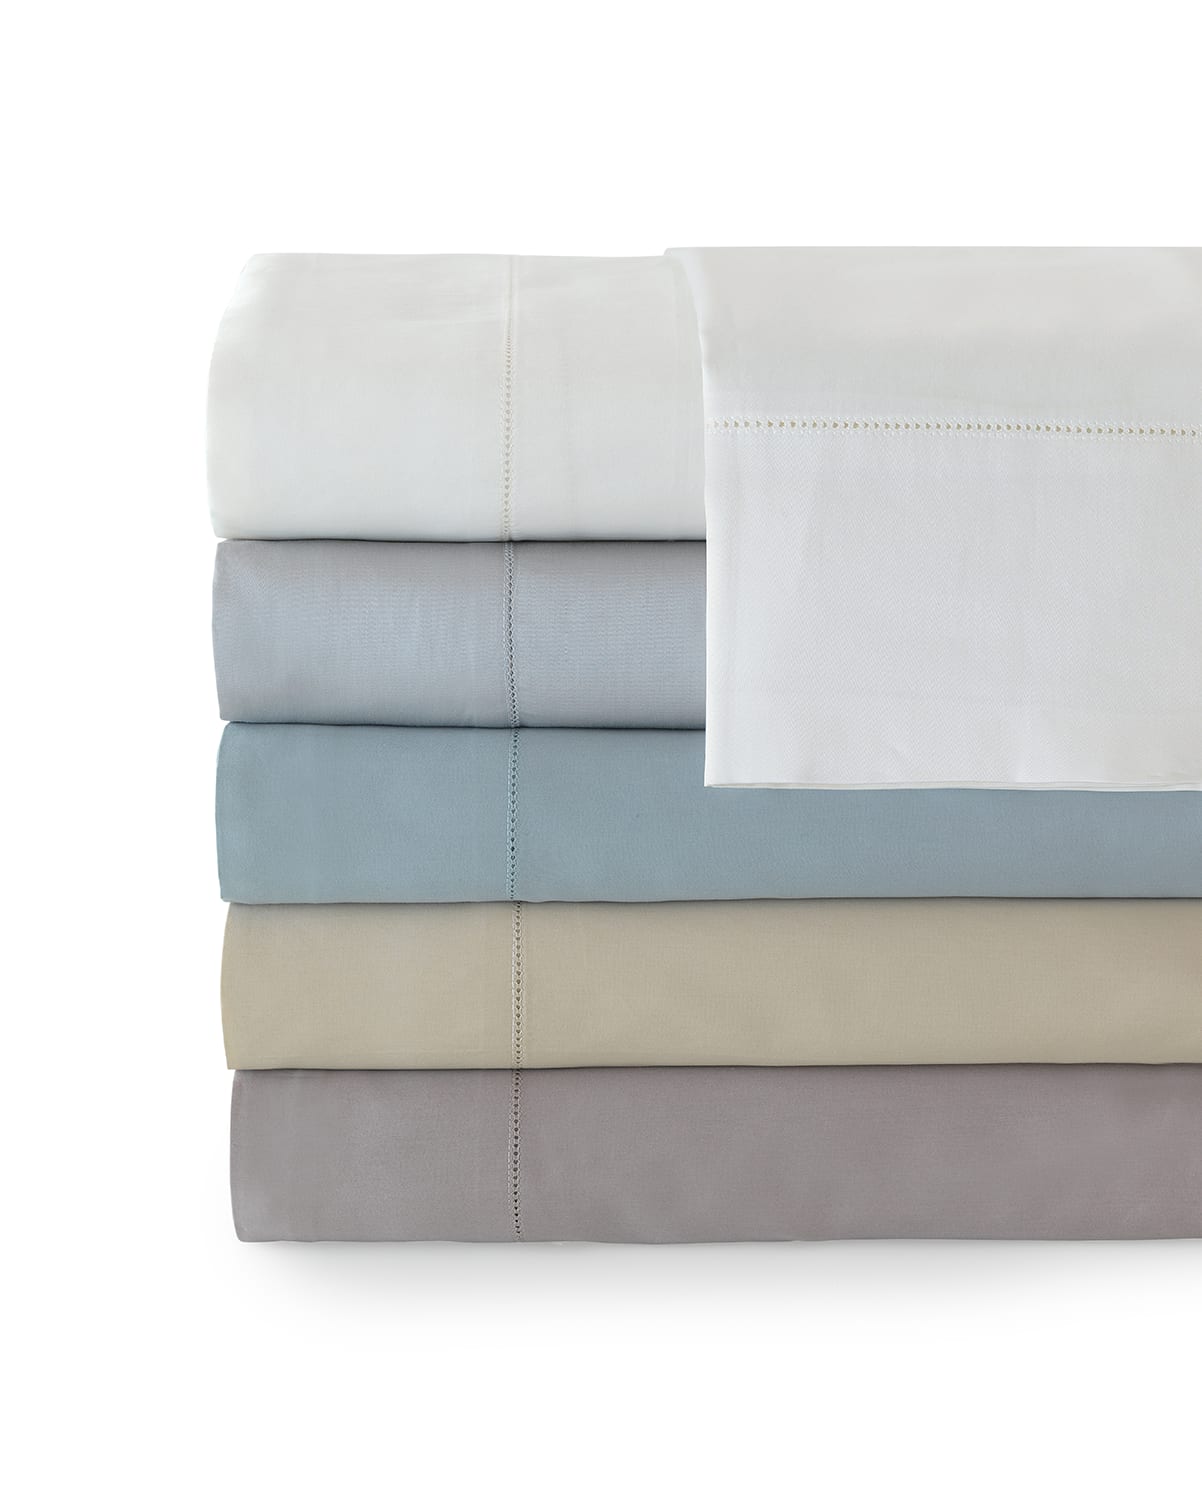 Image Eastern Accents Queen 300 Thread Count Fitted Sheet